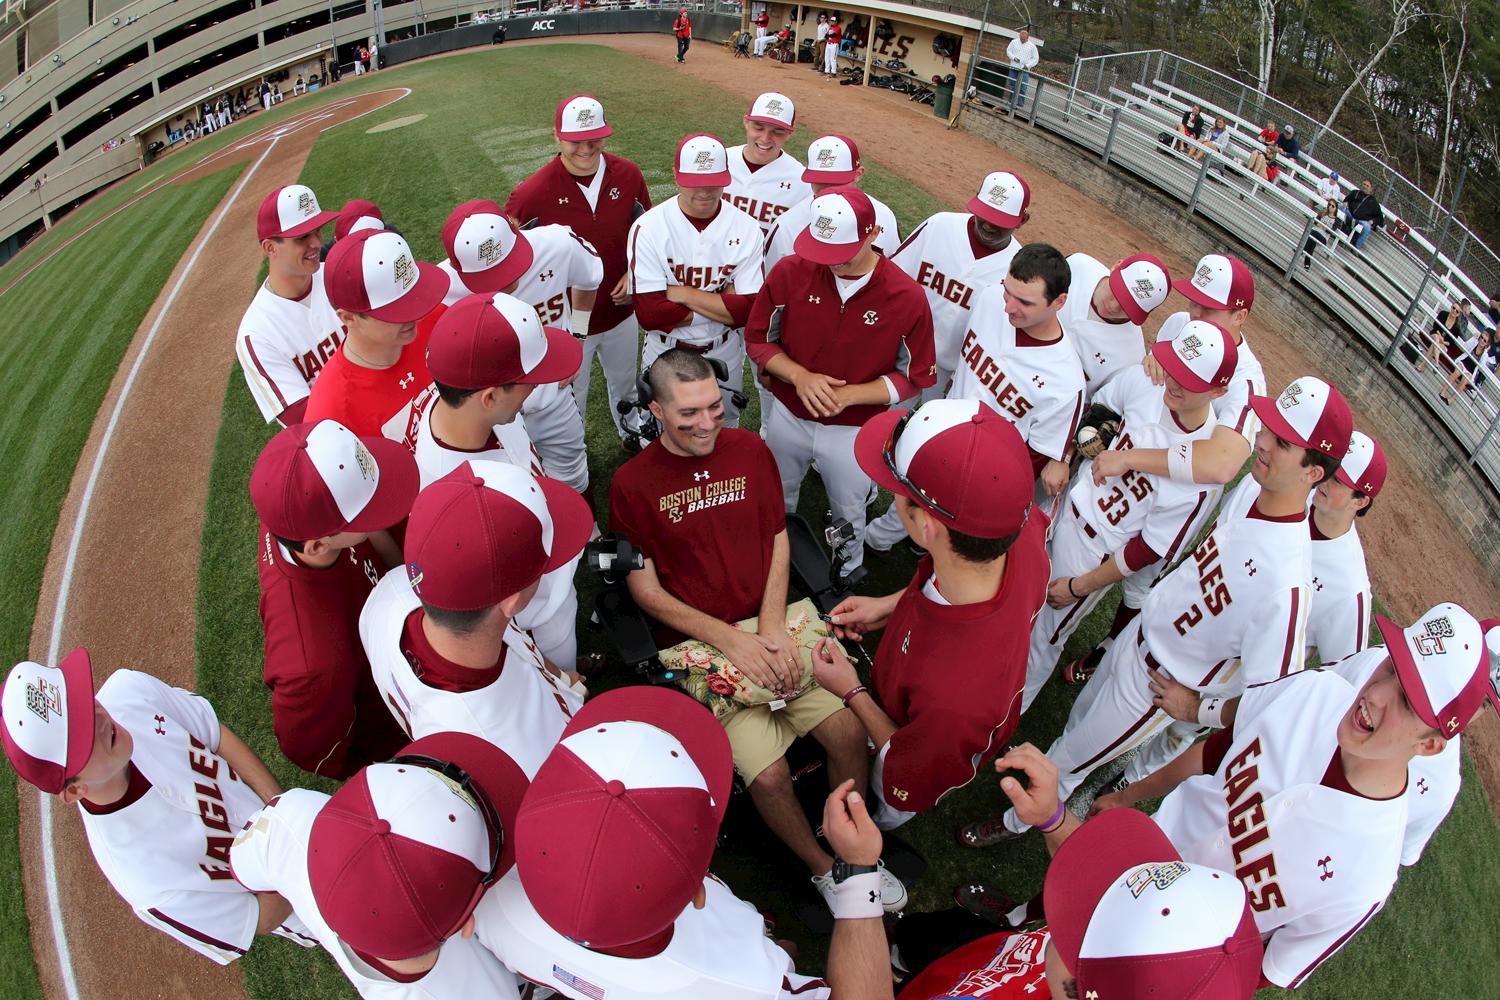 Pete Frates and baseball team